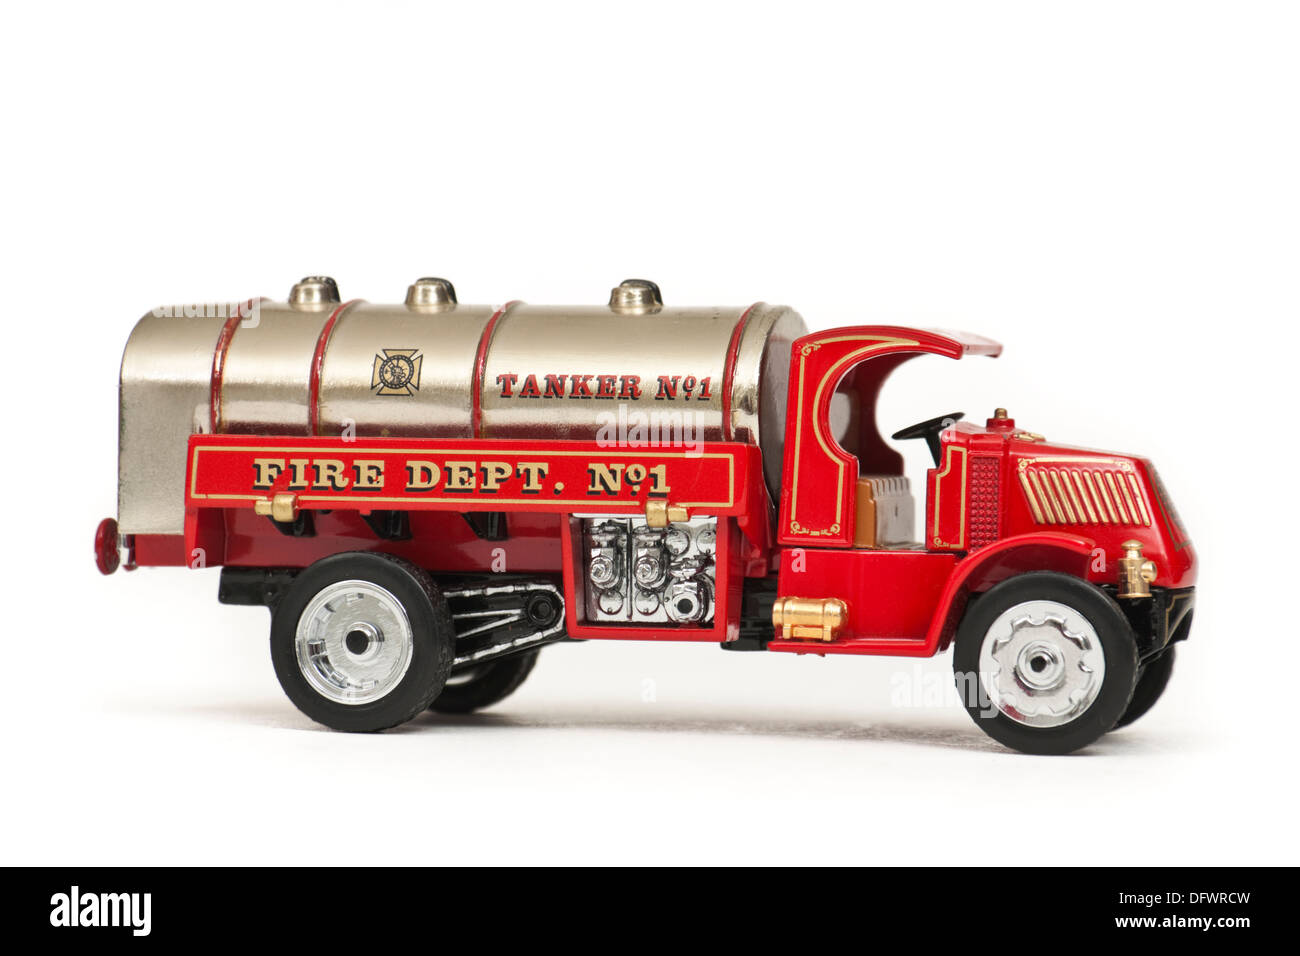 American vintage fire engine replica / diecast model toy by Matchbox Stock Photo